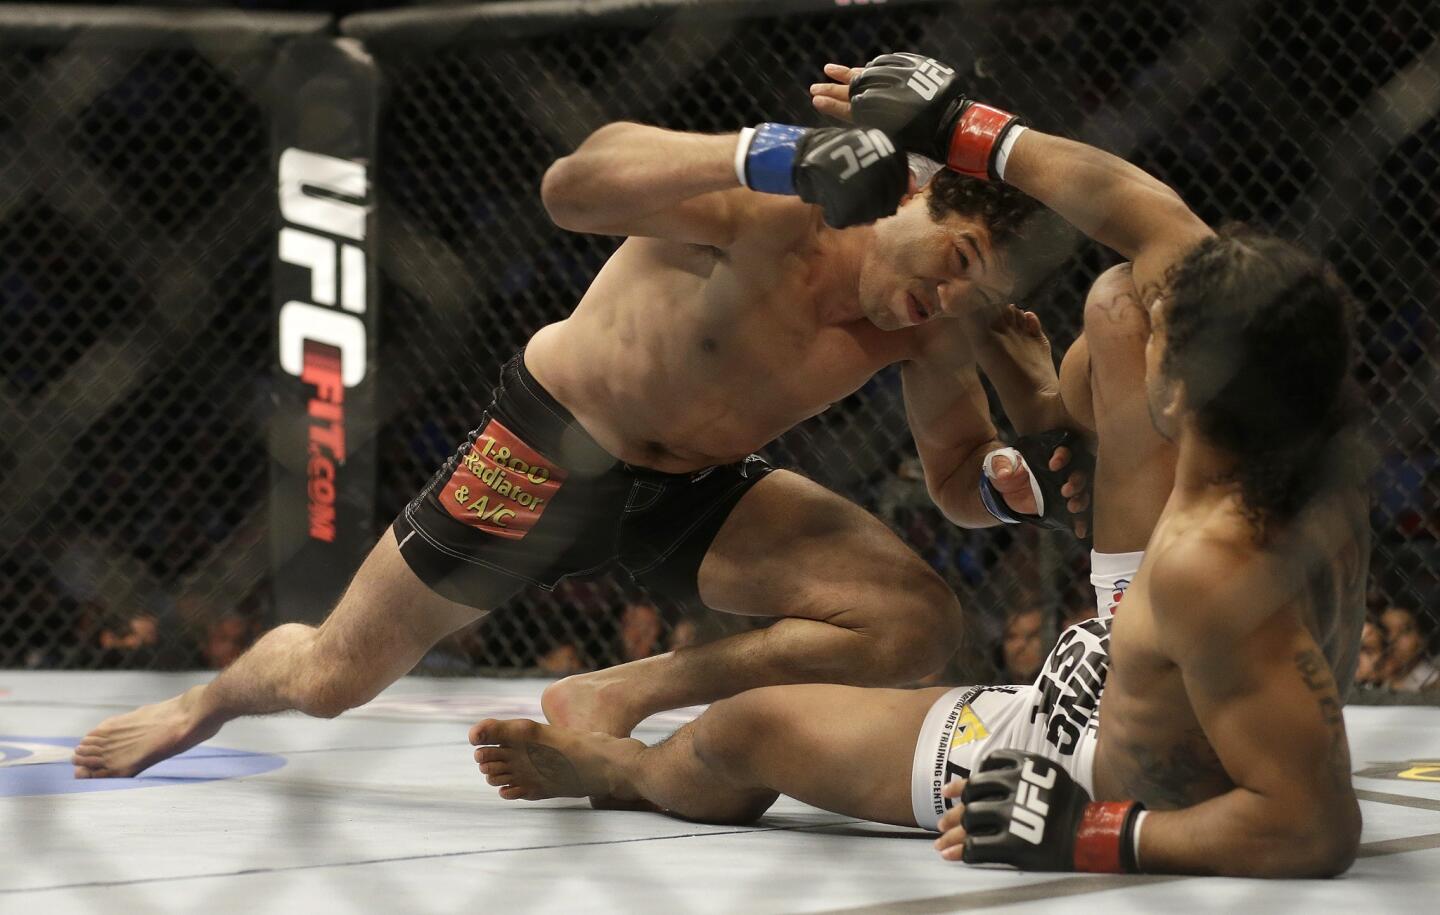 Gilbert Melendez tries to gain the upper hand with Benson Henderson on the mat during the first round of their UFC lightweight championship fight on Saturday night in San Jose.